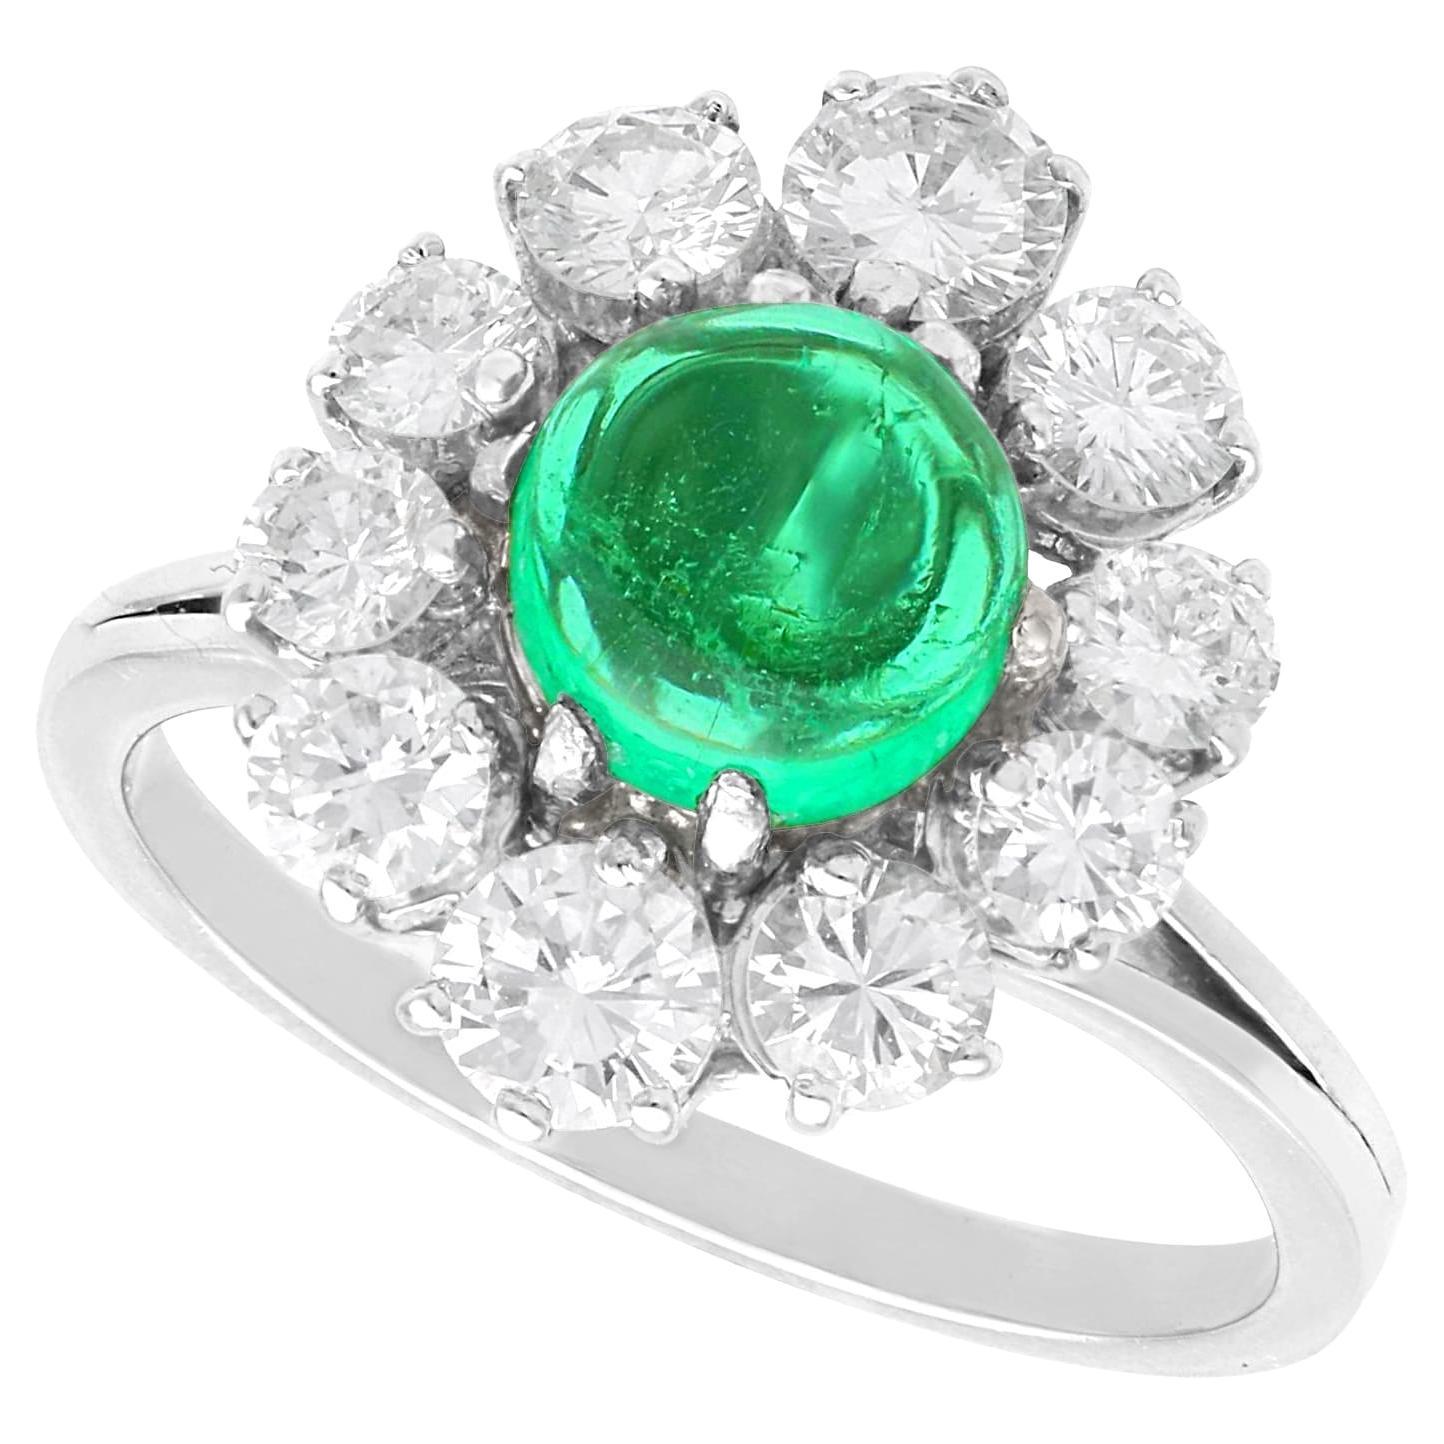 Vintage French 1.50ct Emerald & 2.40ct Diamond 18k White Gold Cluster Dress Ring